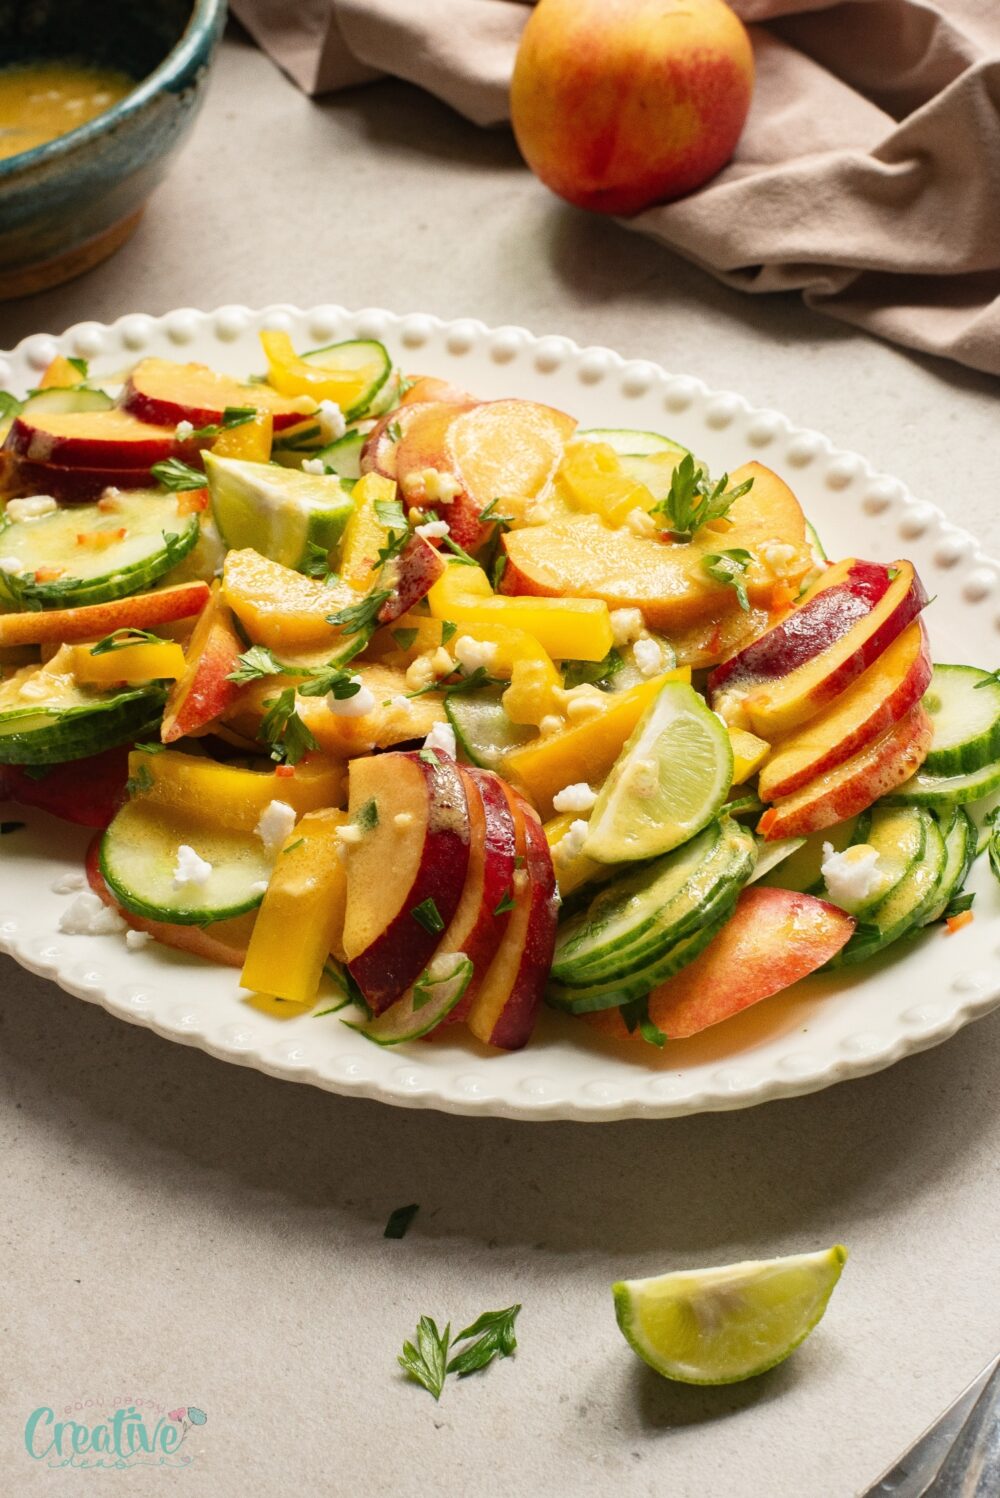 Zesty nectarine and cucumber salad, a versatile dish bursting with vibrant summer flavors.